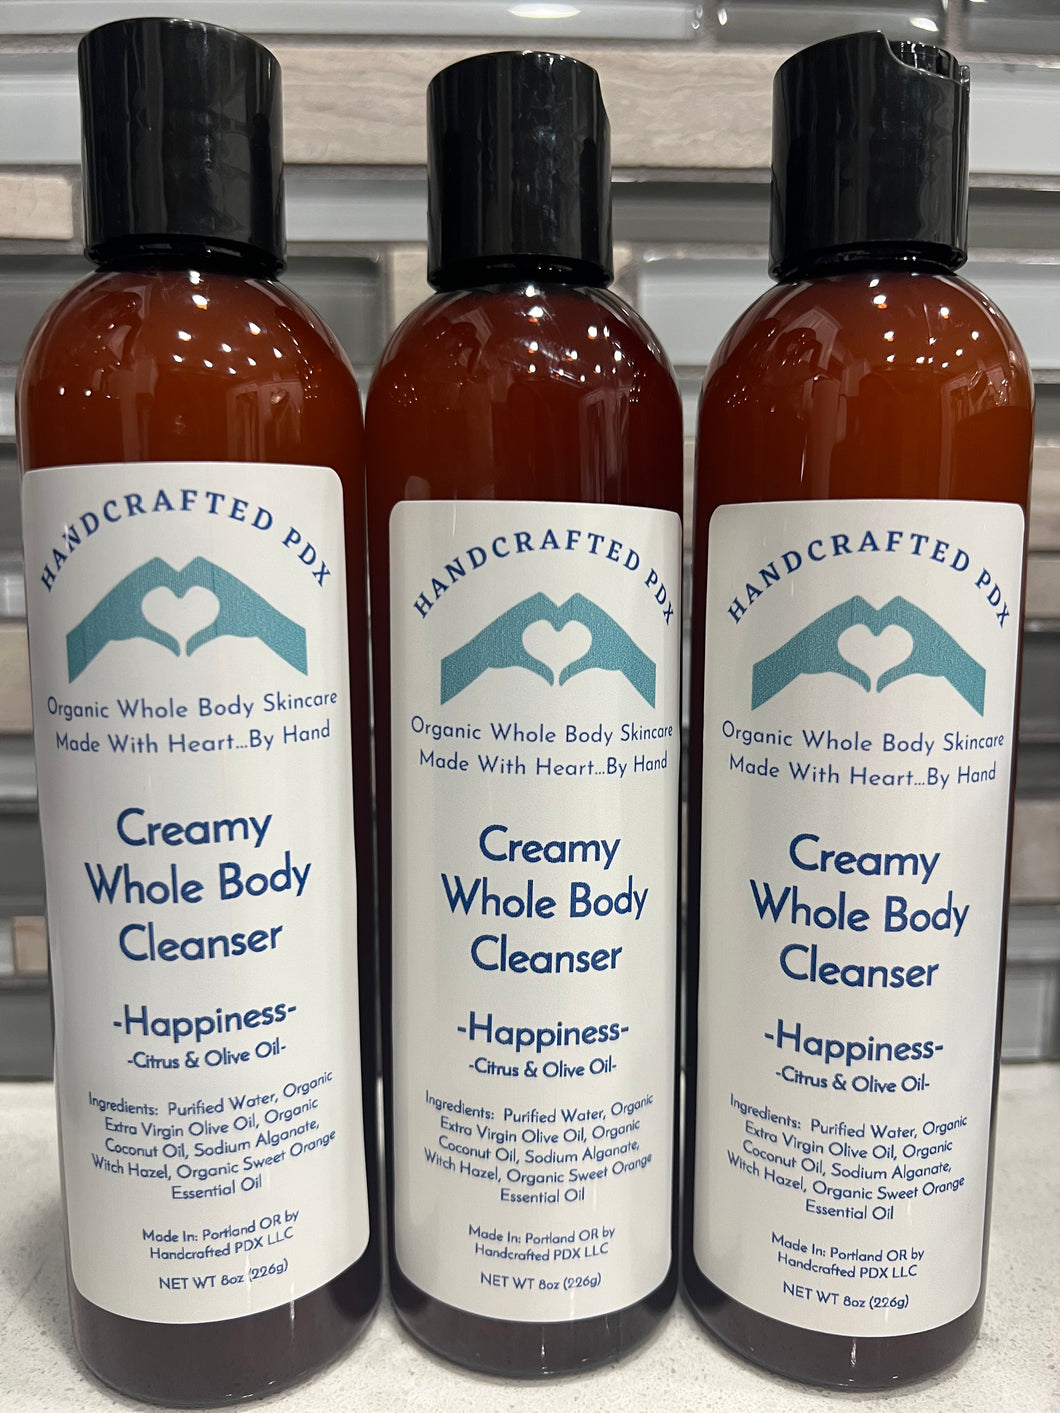 Creamy Whole Body Cleanser